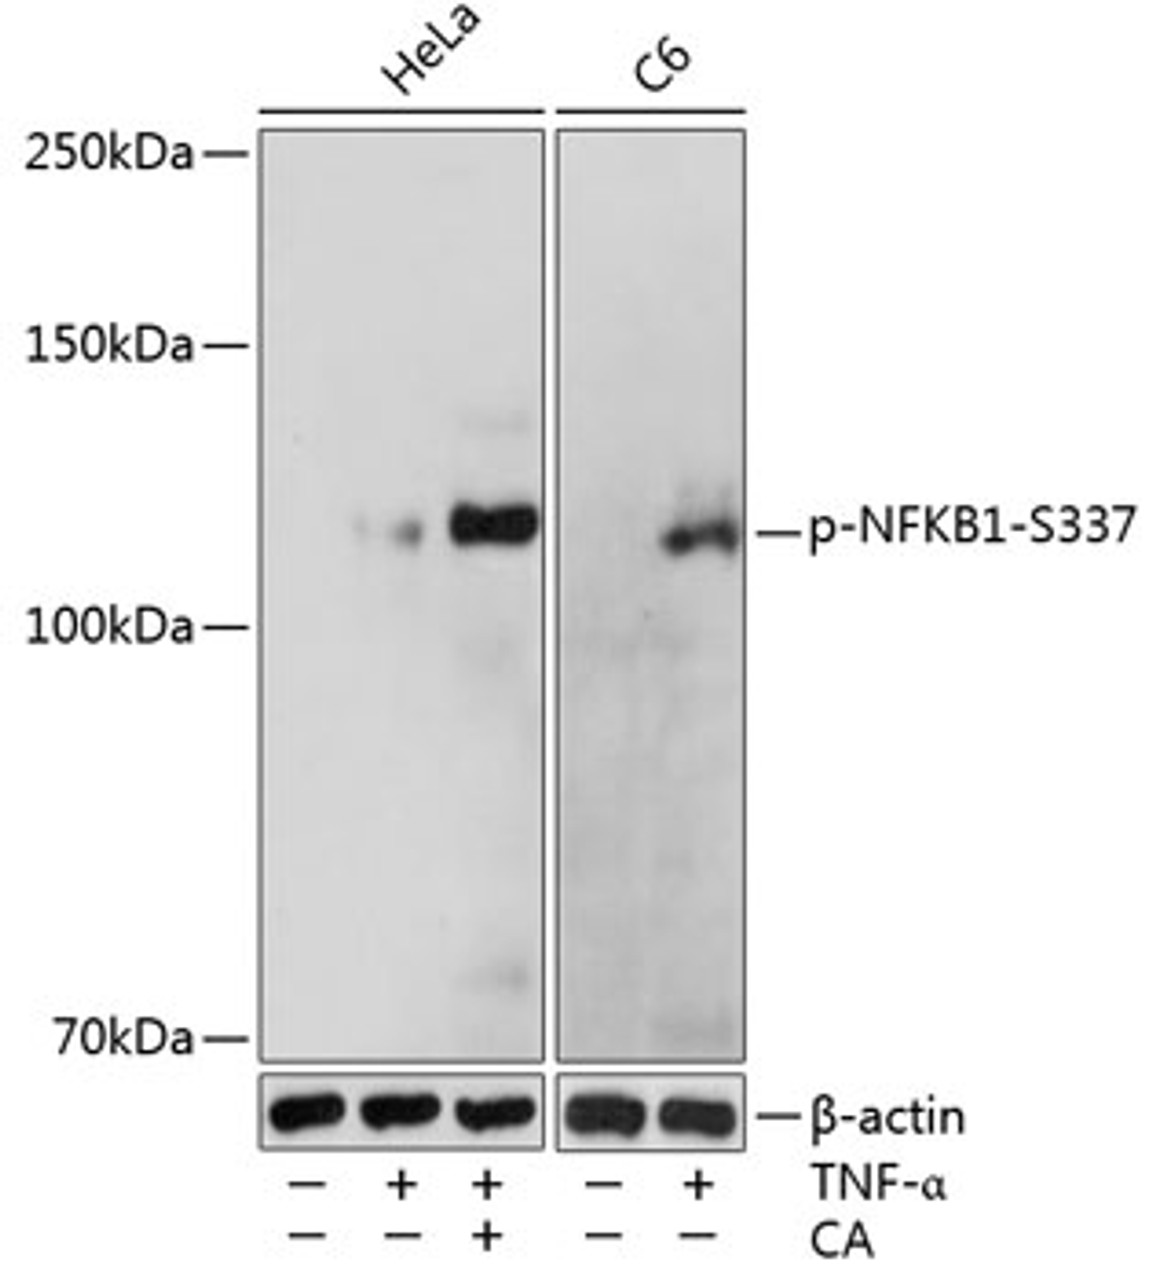 Western blot analysis of extracts of various cell lines using Phospho-NFKB1(S337) Polyclonal Antibody at dilution of 1:1000. HeLa cells were treated by TNF-α (20 ng/ml) and Calyculin A (100 nM) at 37°C for 10 minutes. C6 cells were treated by TNF-α (20 ng/ml) at 37°C for 10 minutes.